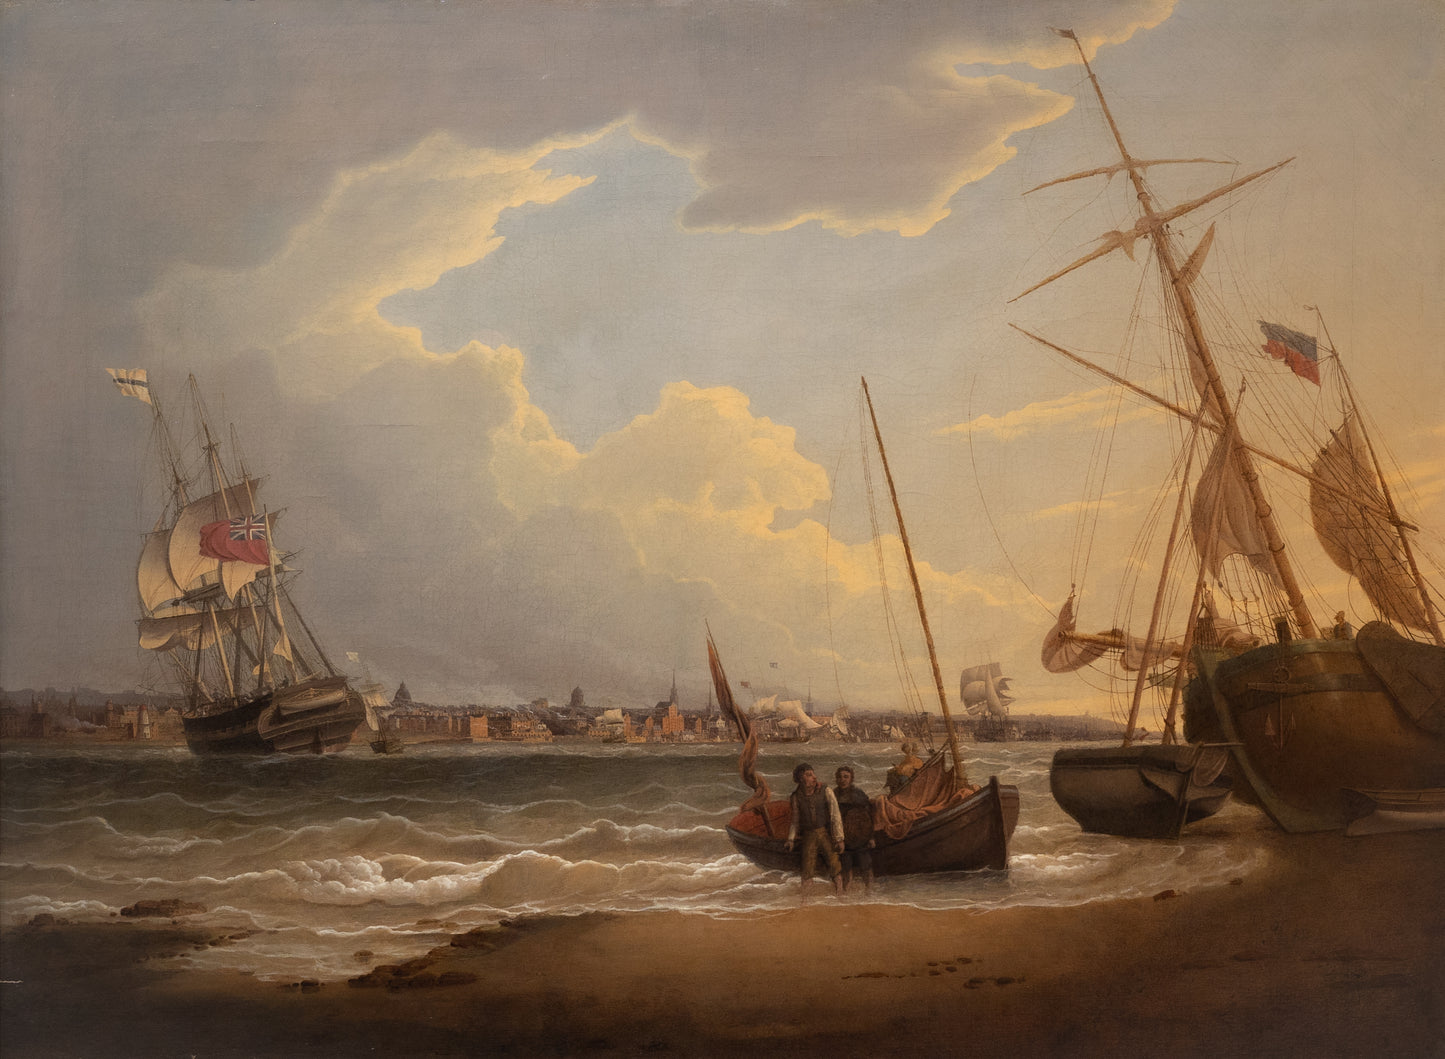 Robert Salmon. The Ship Liverpool in the Mercey, seen from Wallasey. 1810.